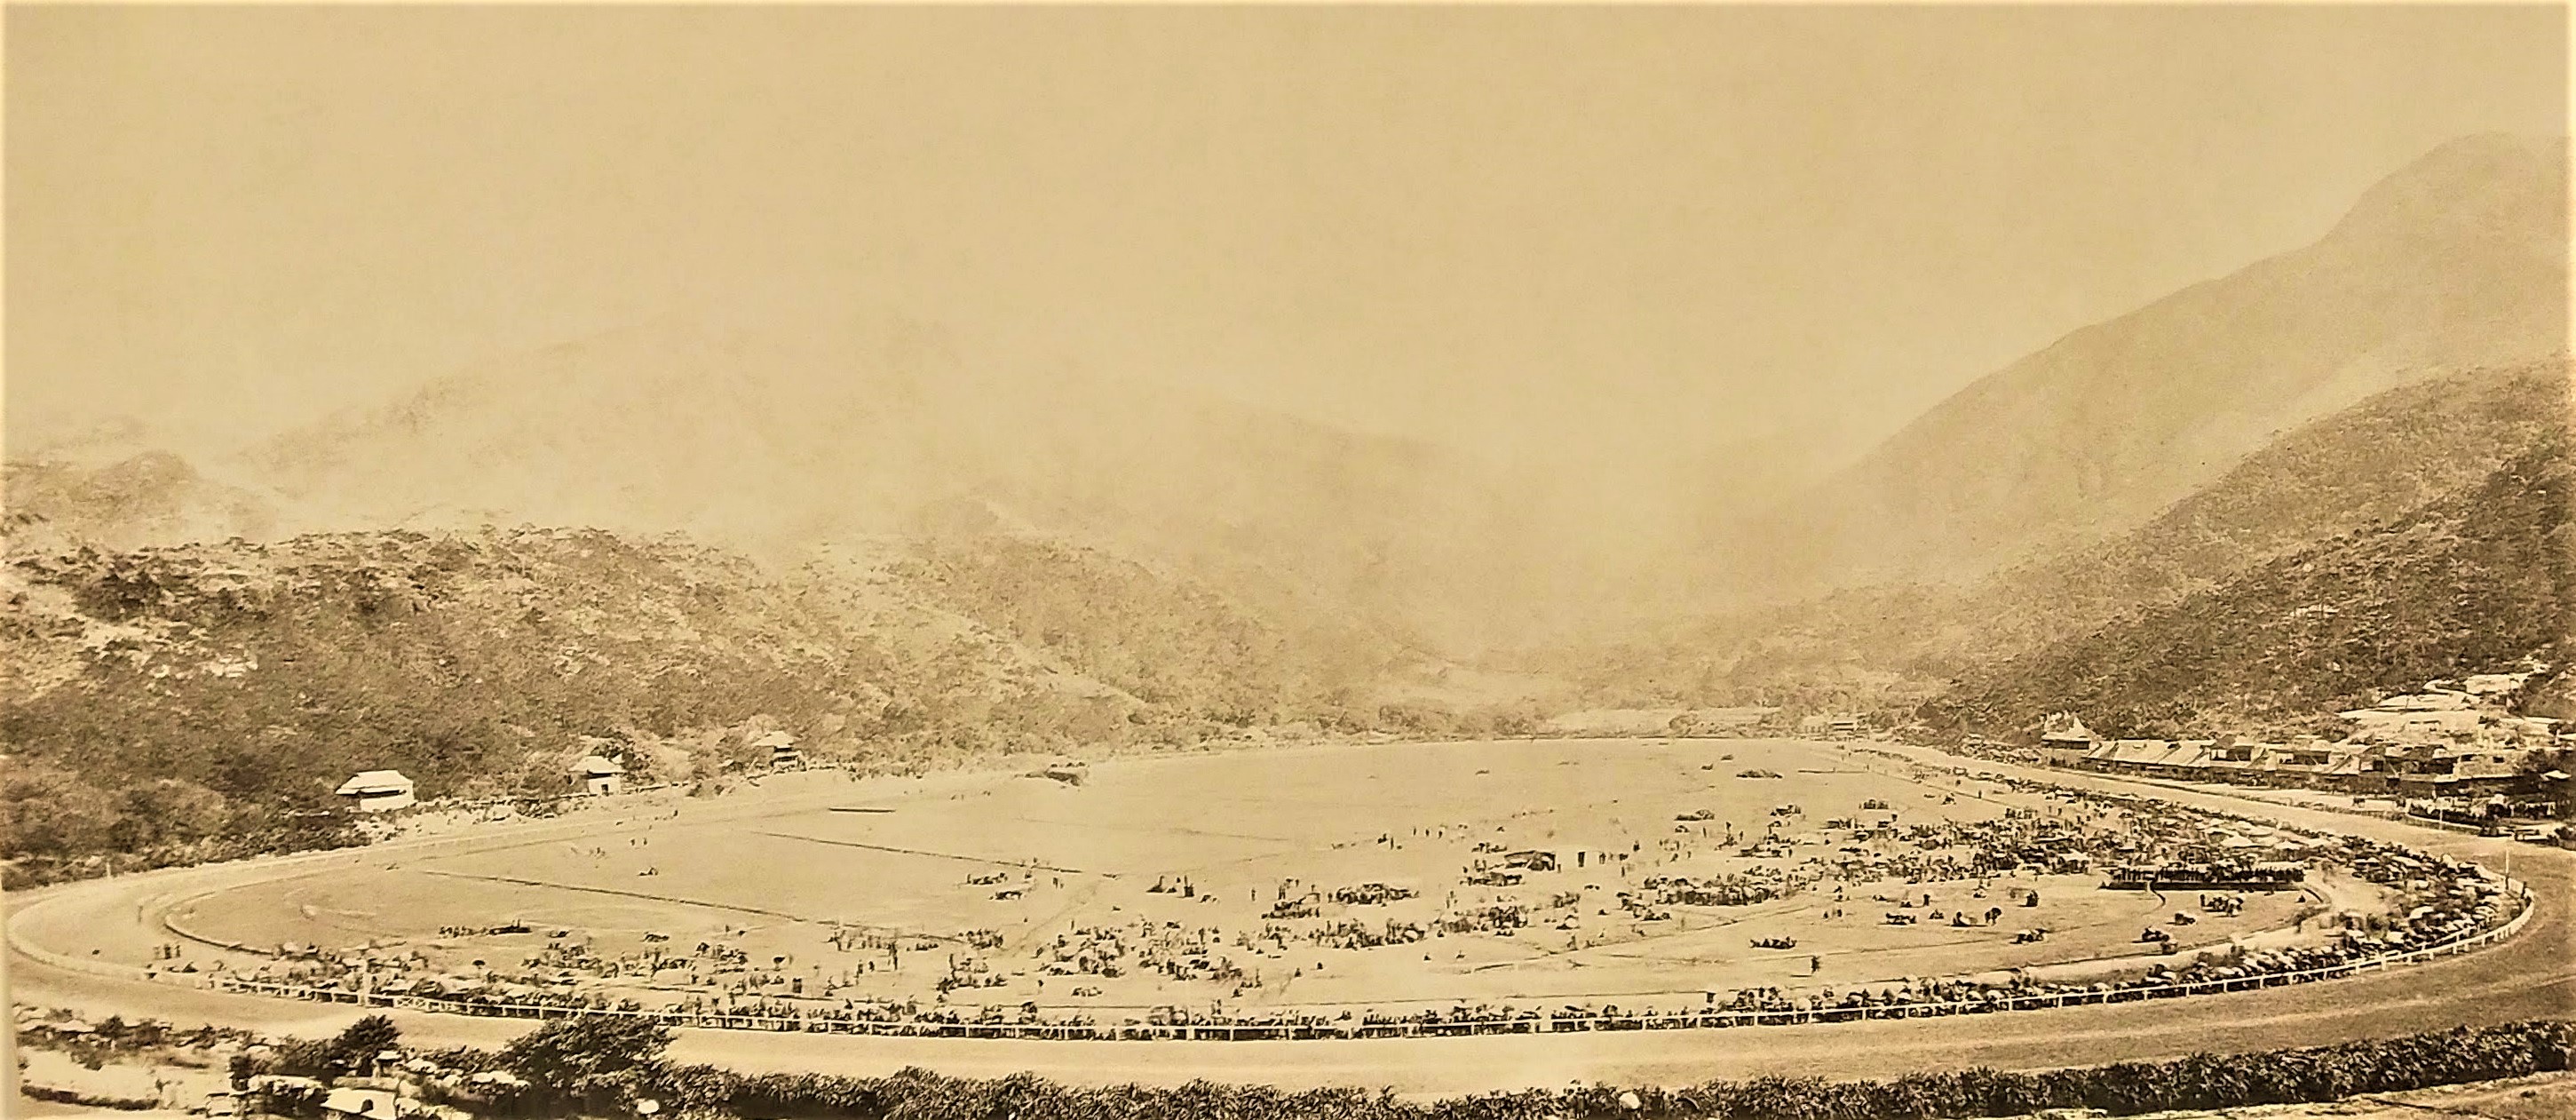 Happy Valley Race Course in the past